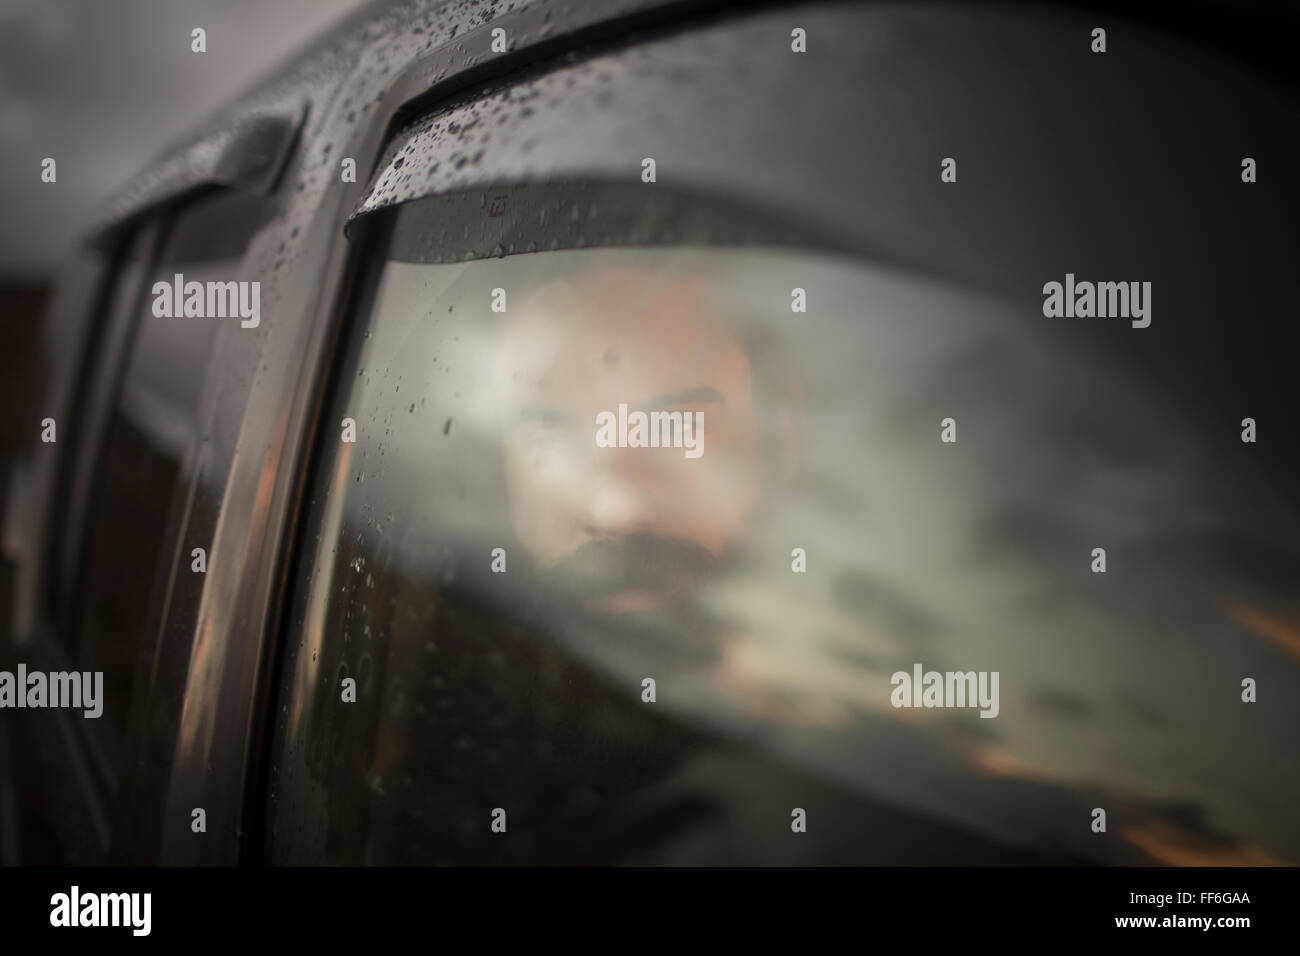 A man sitting in a car looking out. Reflections of the sunset sky on the window. Stock Photo